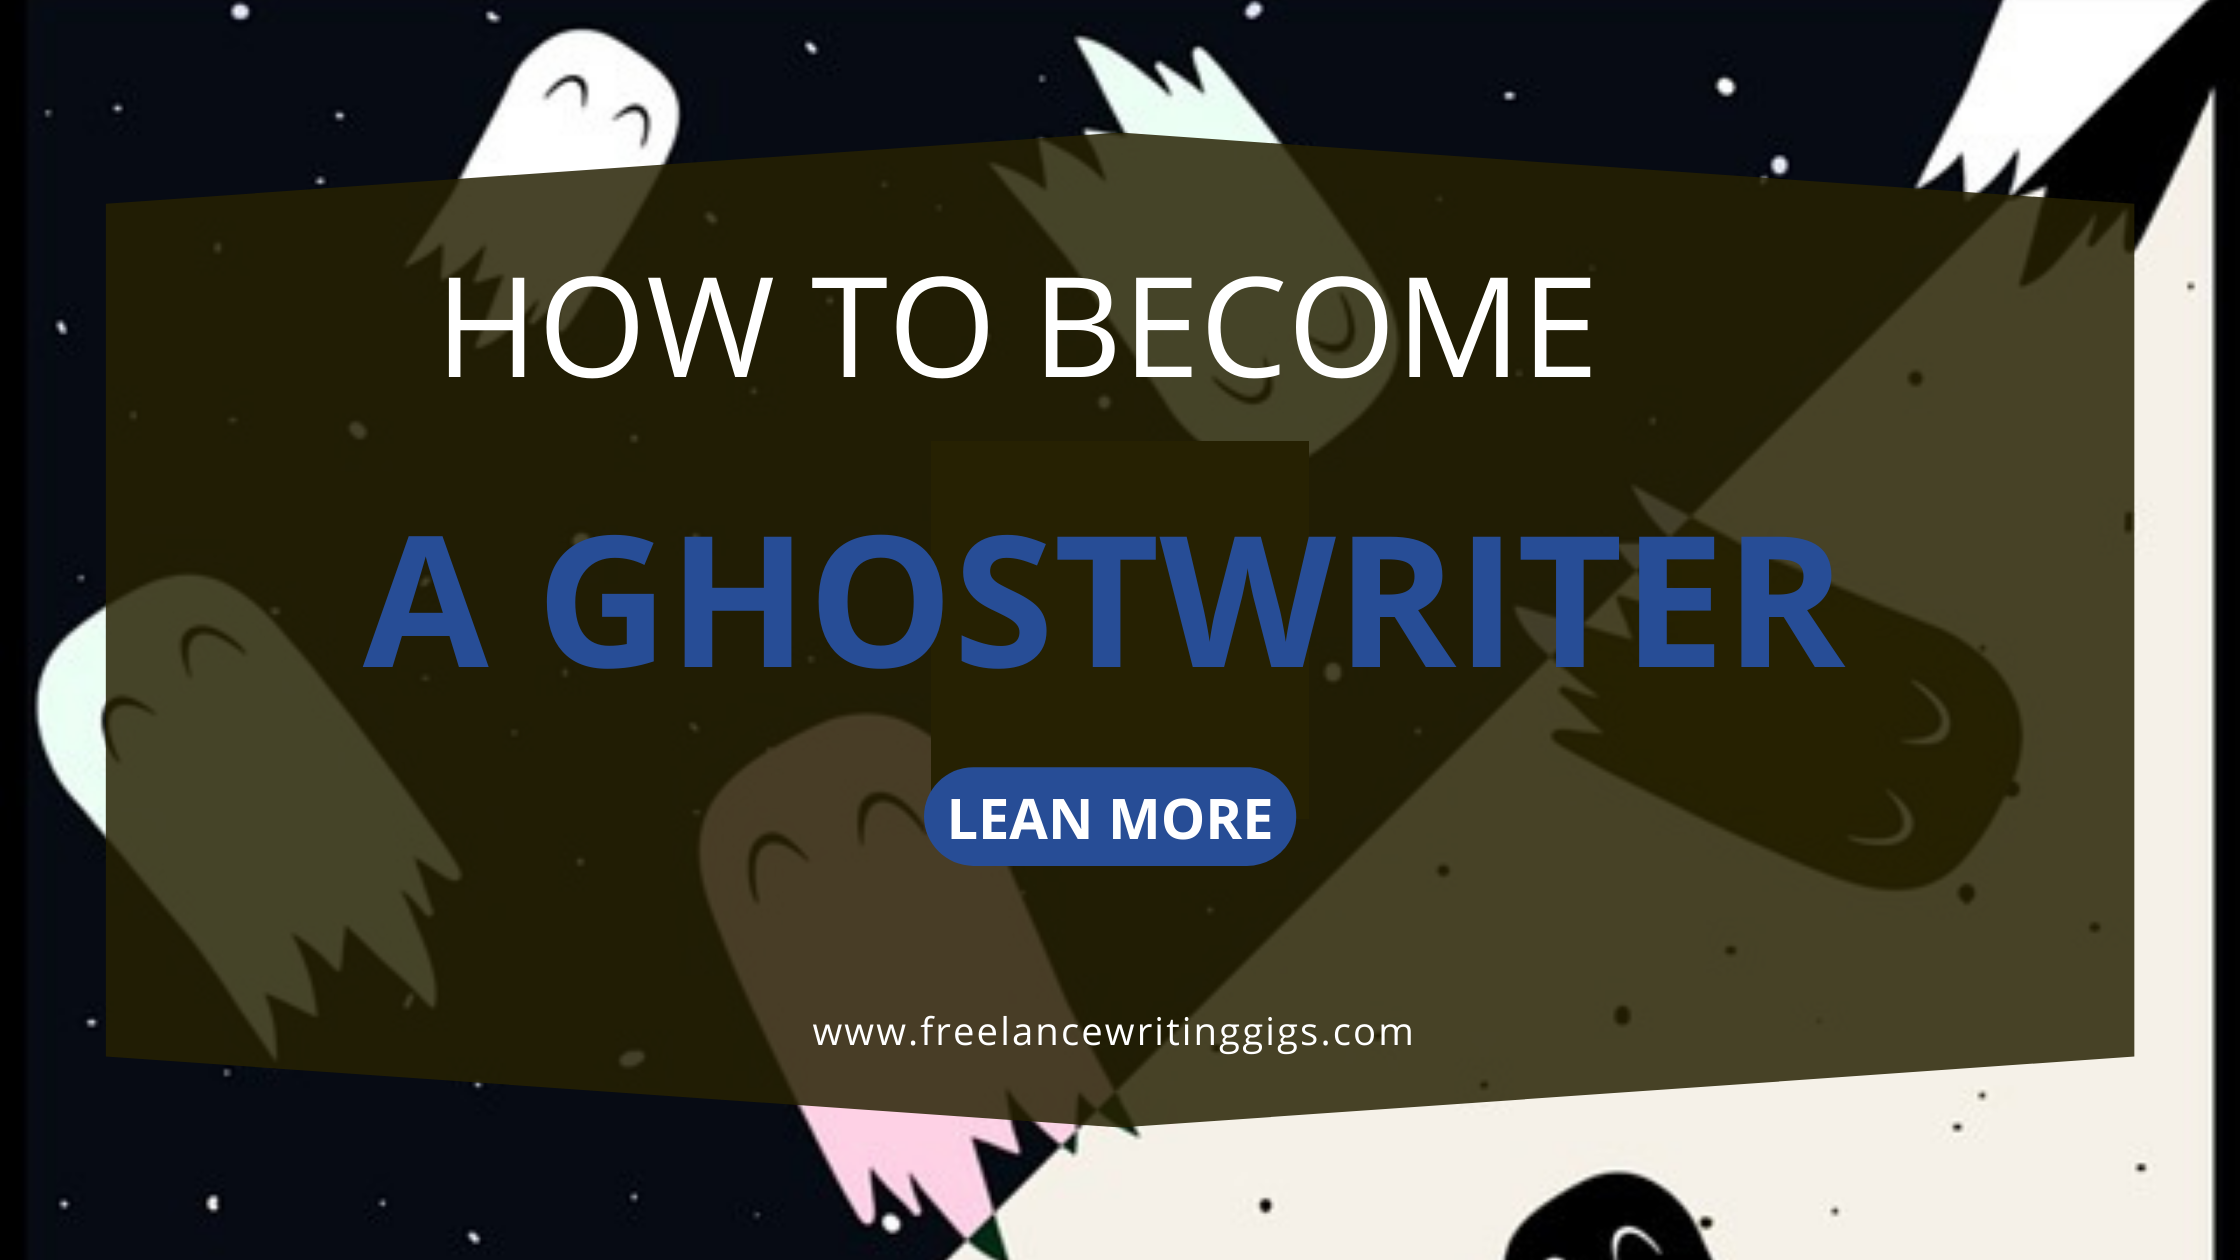 How to Become a Ghostwriter: A 5-Step Guide